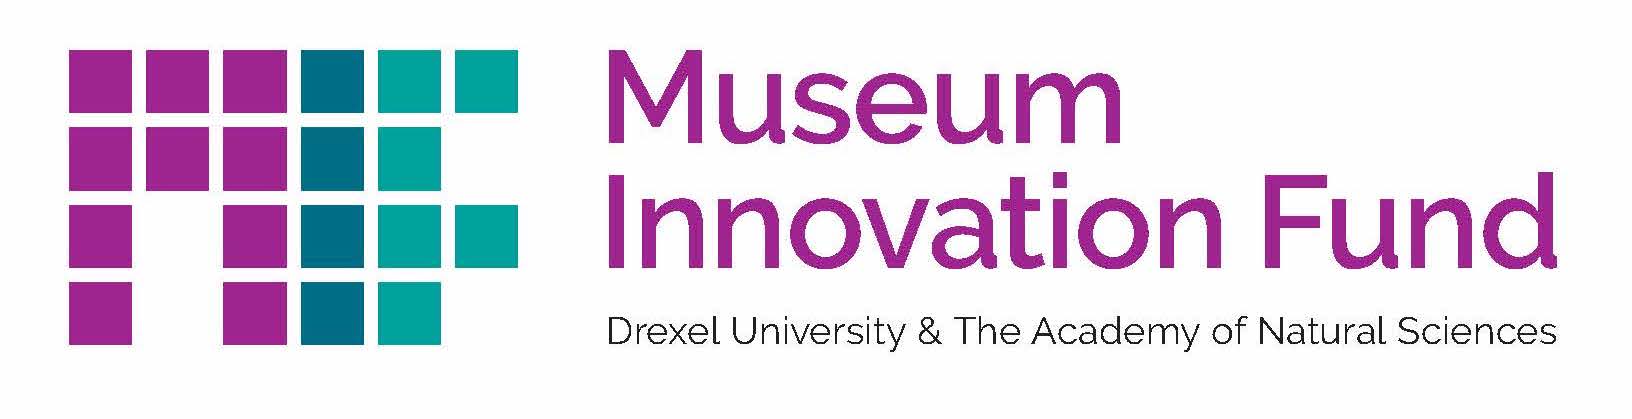 Museum Innovation Fund - Drexel University & The Academy of Natural Sciences